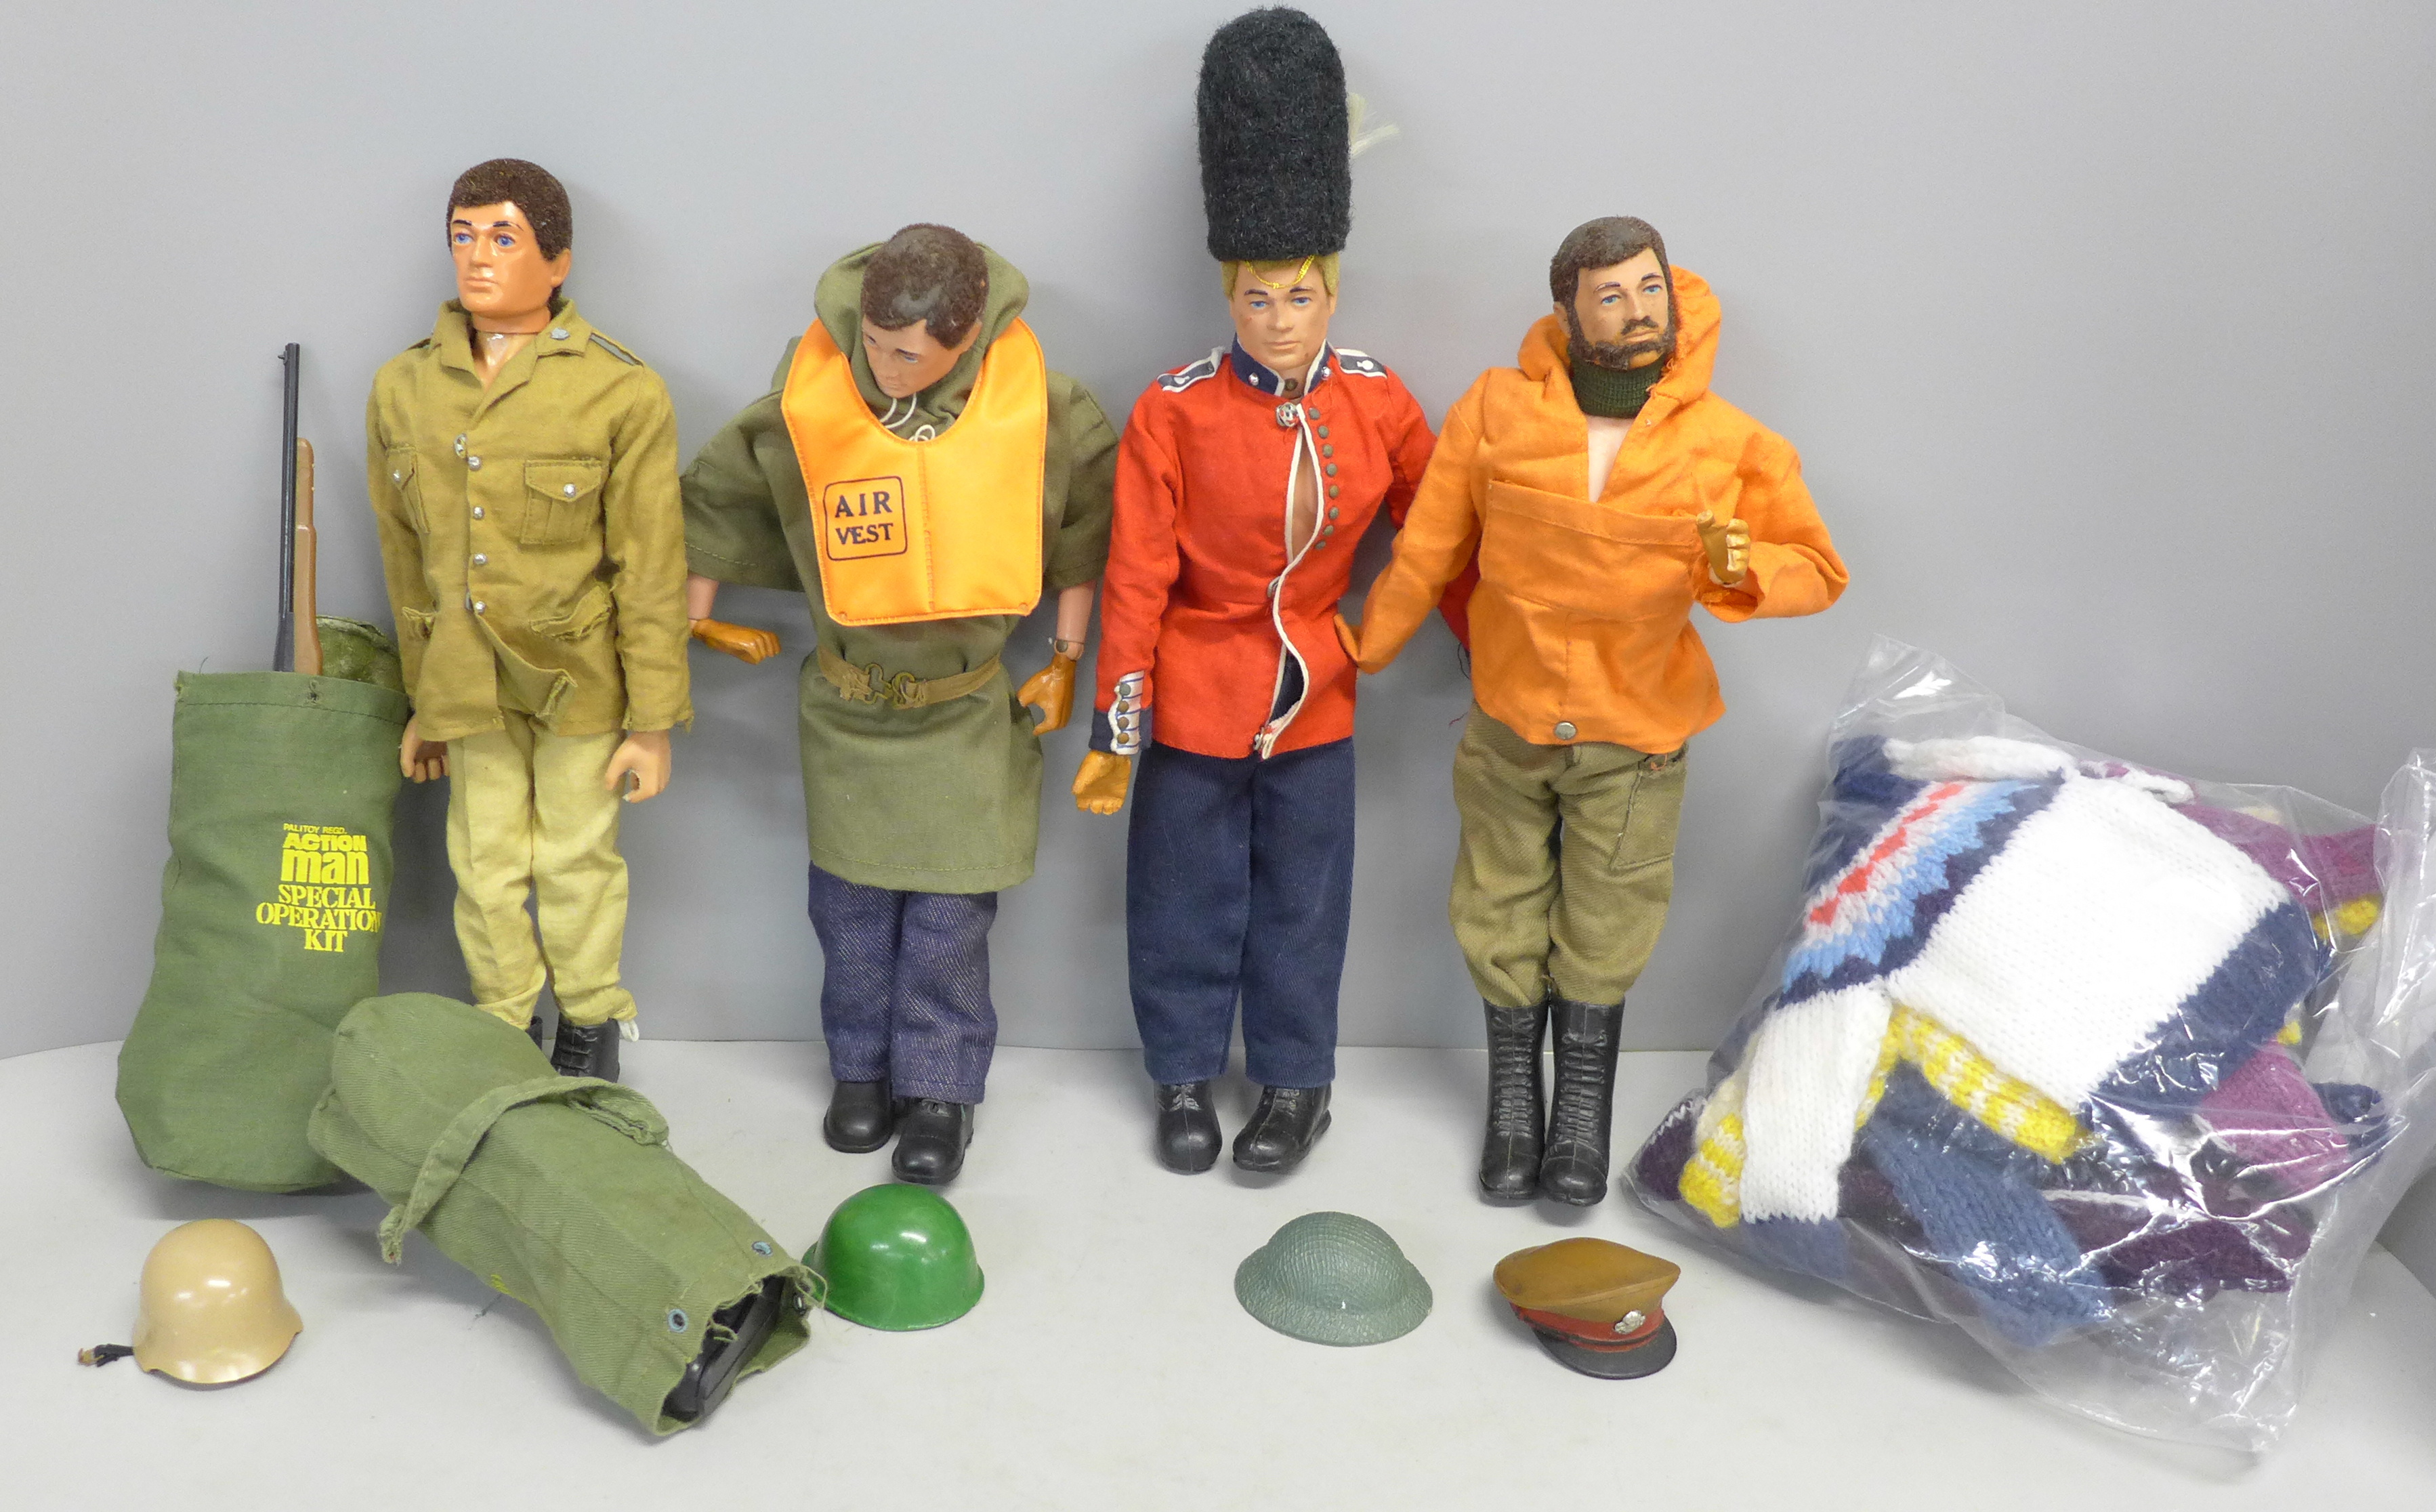 Four vintage Action Man figures and associated clothing